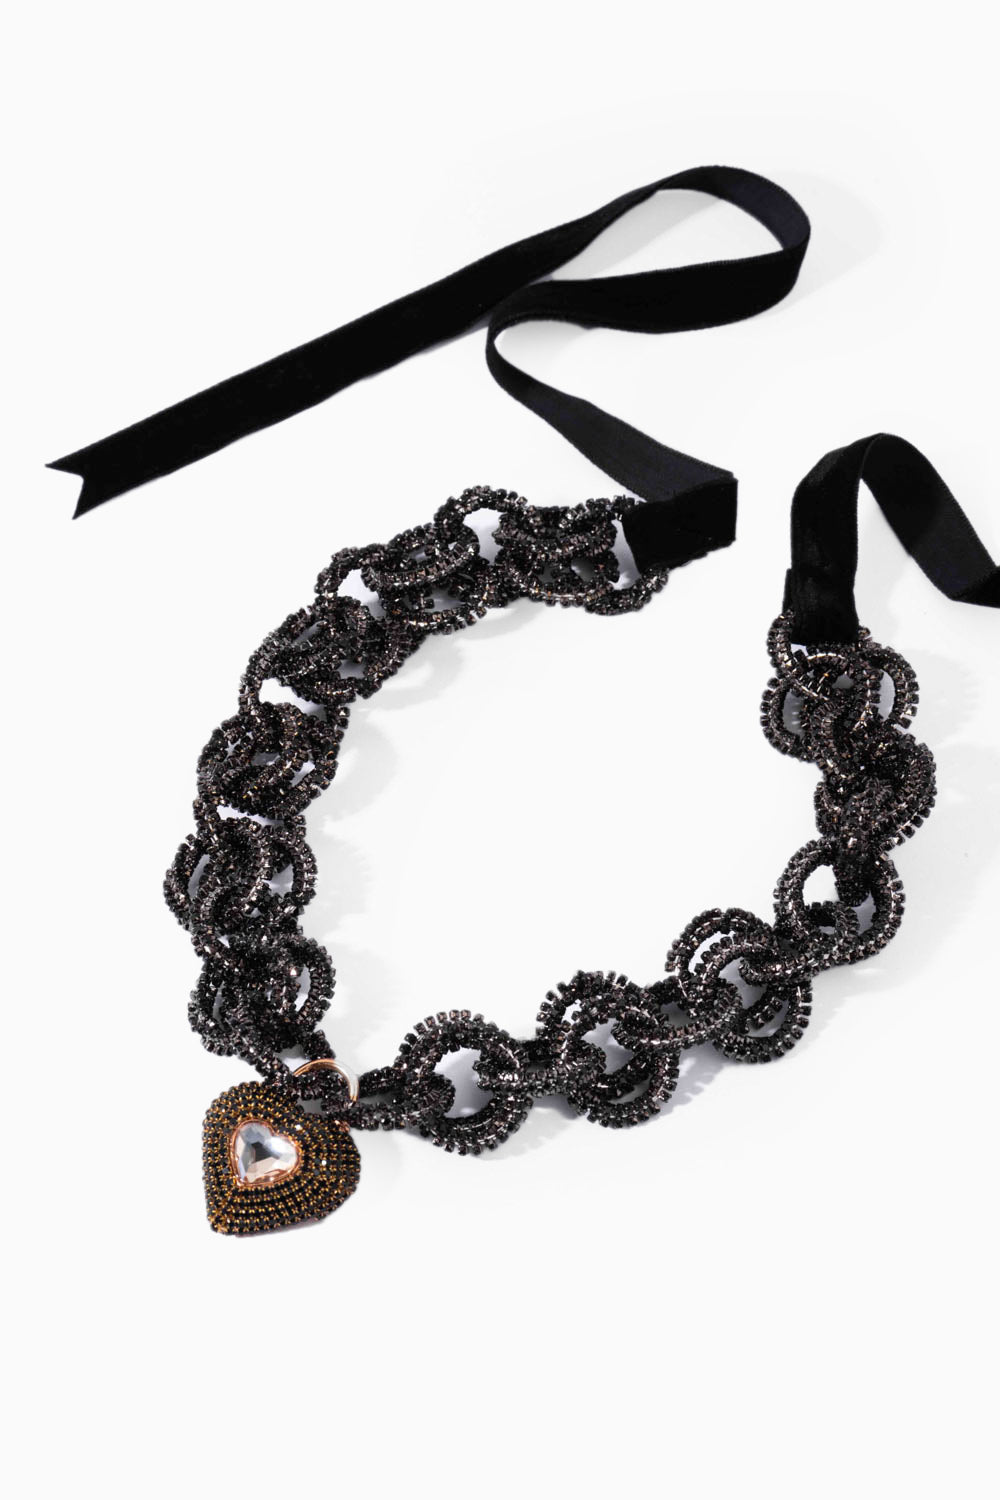 Heart Lock Necklace in Charcoal Black